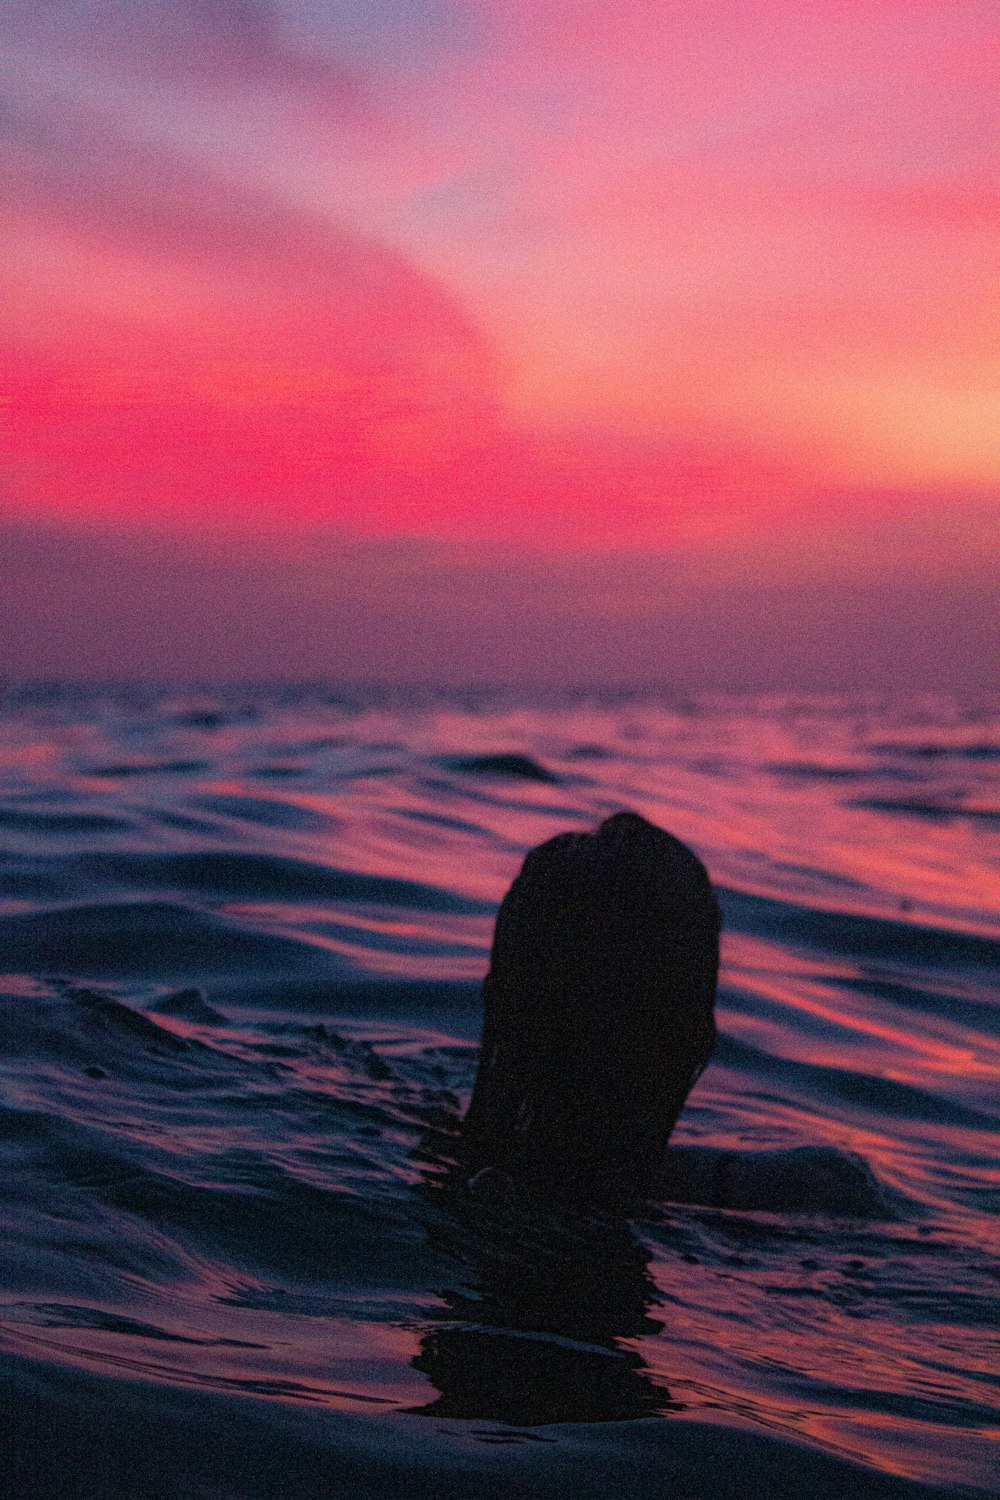 silhouette of person on body of water during sunset